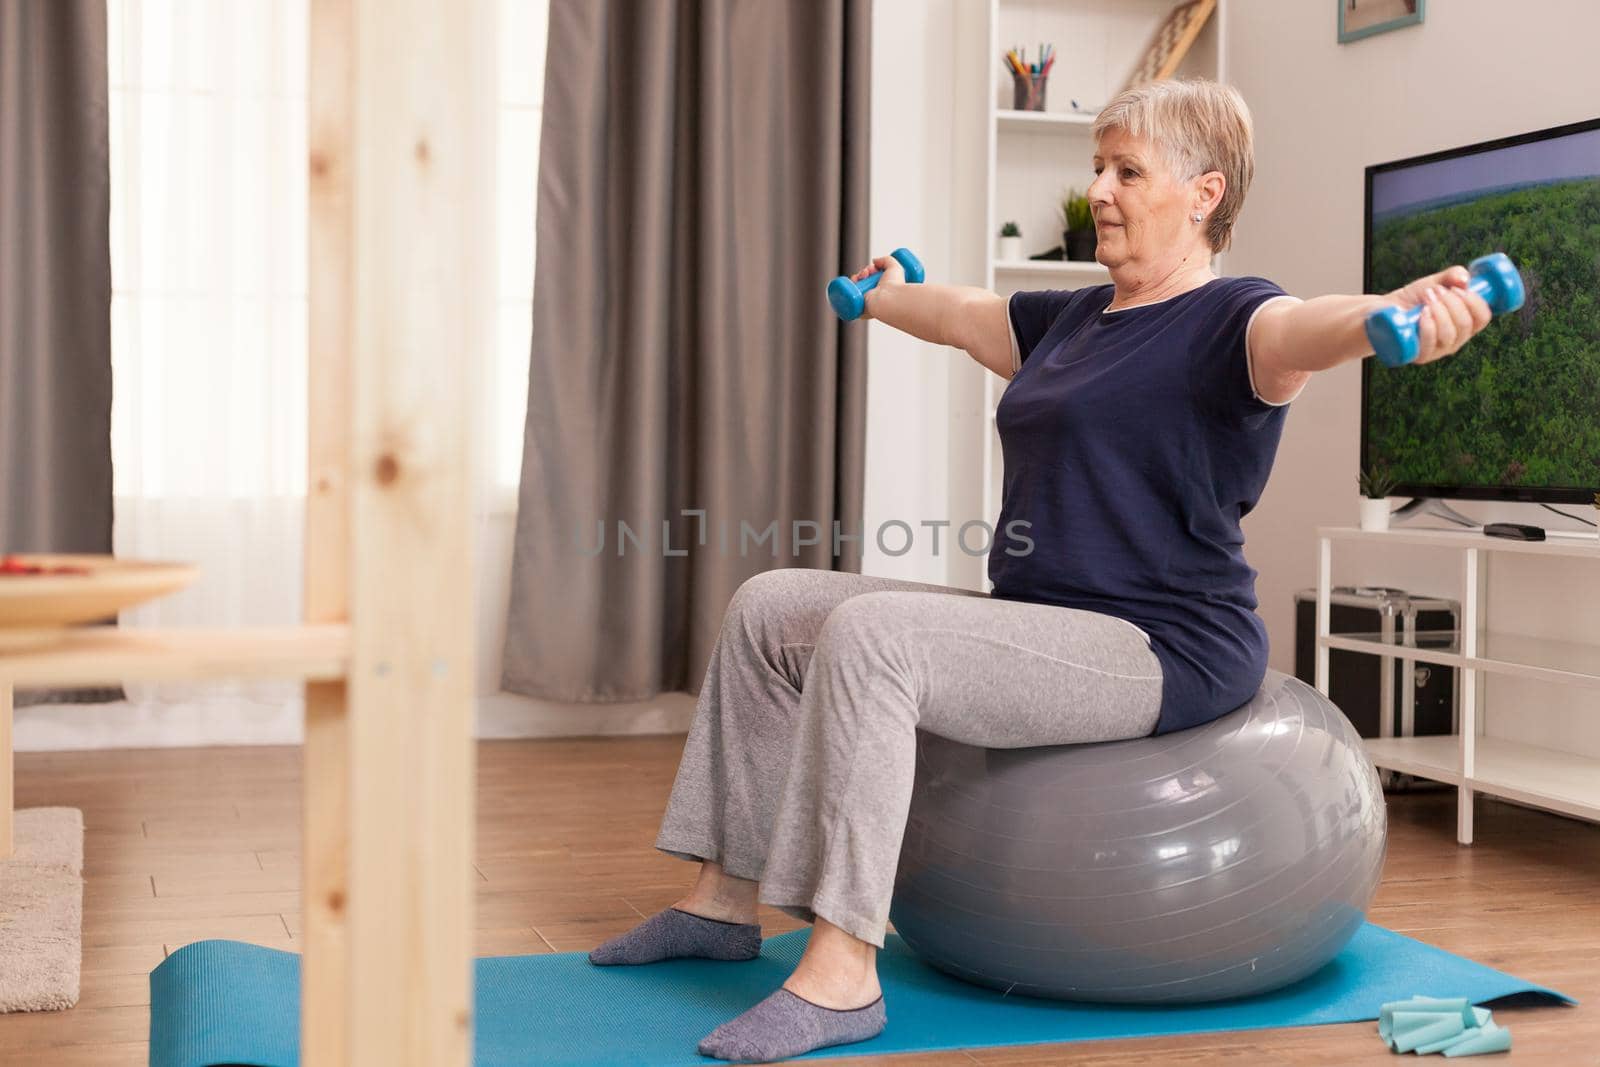 Retired woman doing sports for health in living room. Old person pensioner online internet exercise training at home sport activity with dumbbell, resistance band